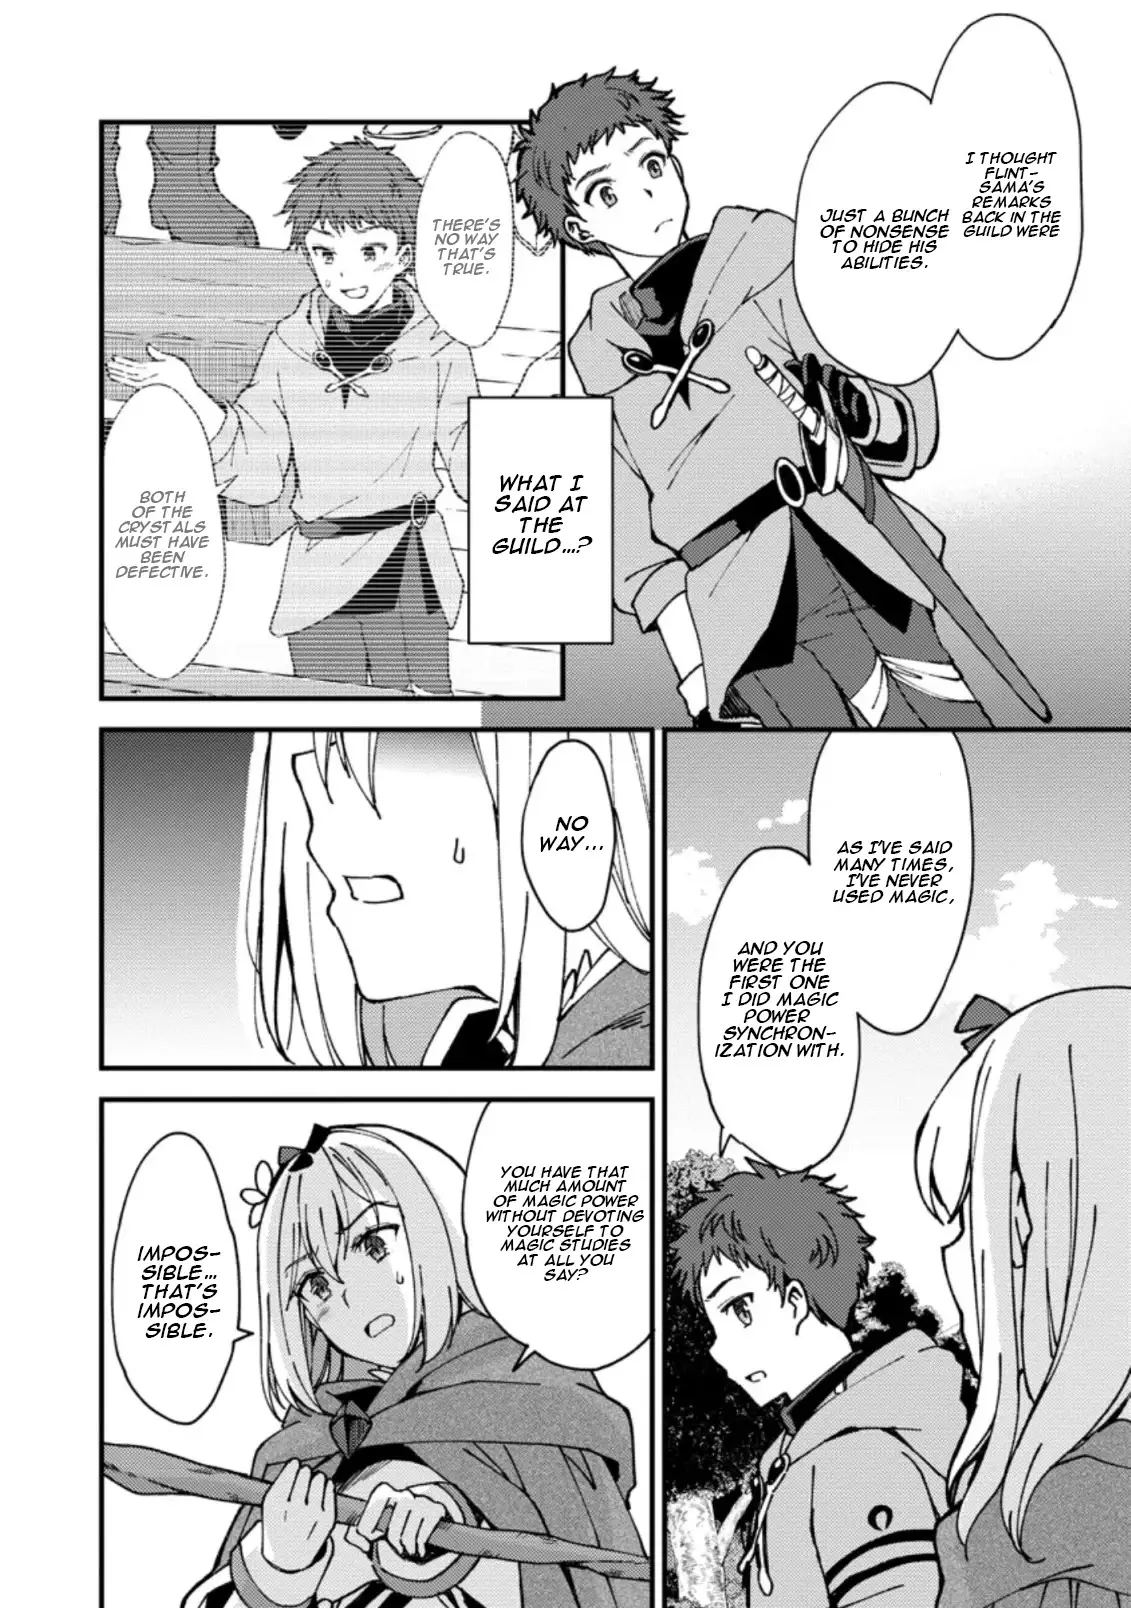 A Sword Master Childhood Friend Power Harassed Me Harshly, So I Broke Off Our Relationship And Make A Fresh Start At The Frontier As A Magic Swordsman. - 3 page 21